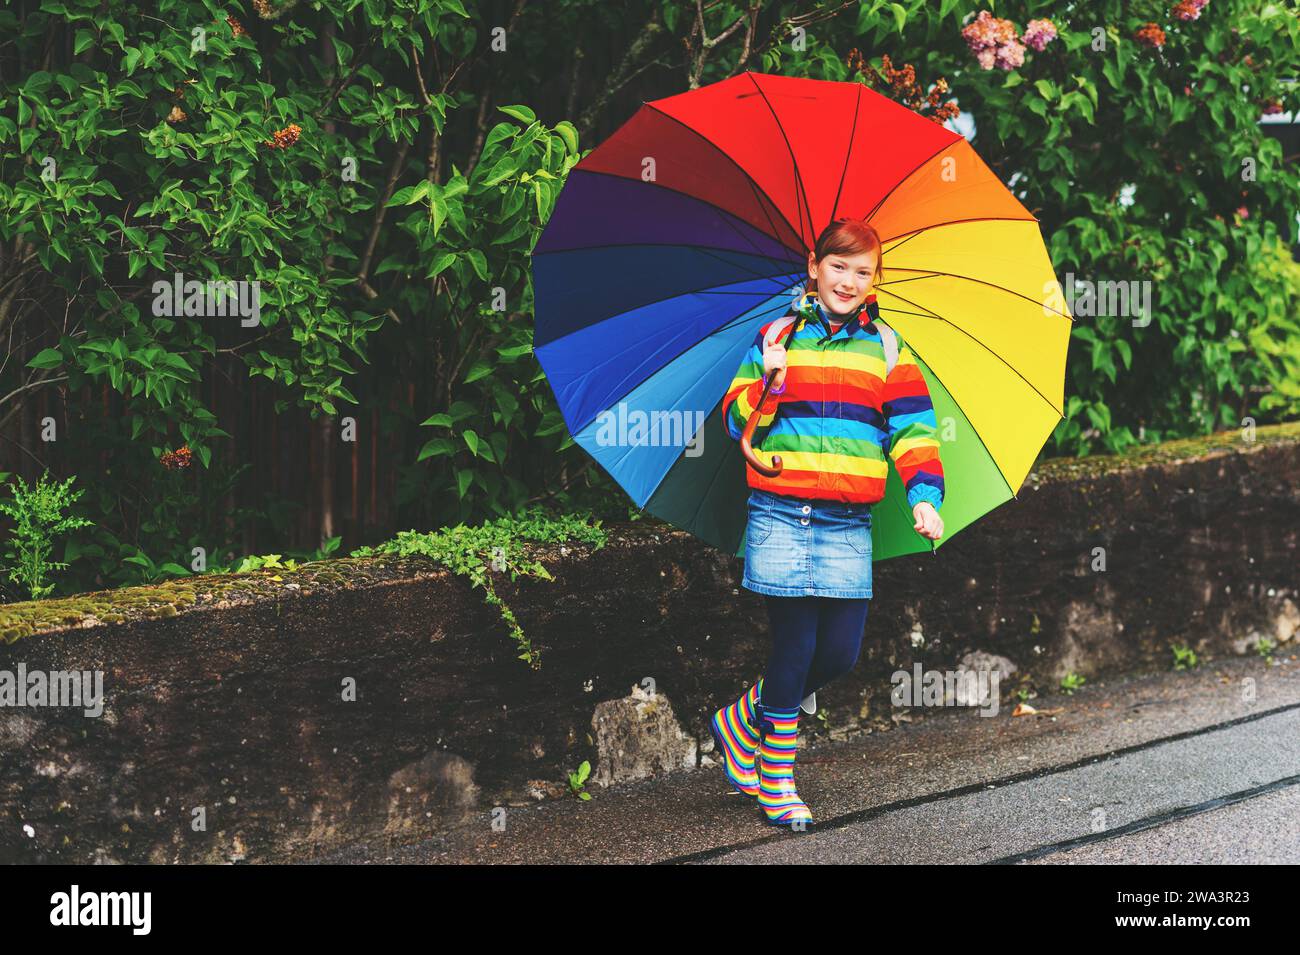 Funny little kid girl playing outdoors under the rain, holding big colorful umbrella Stock Photo